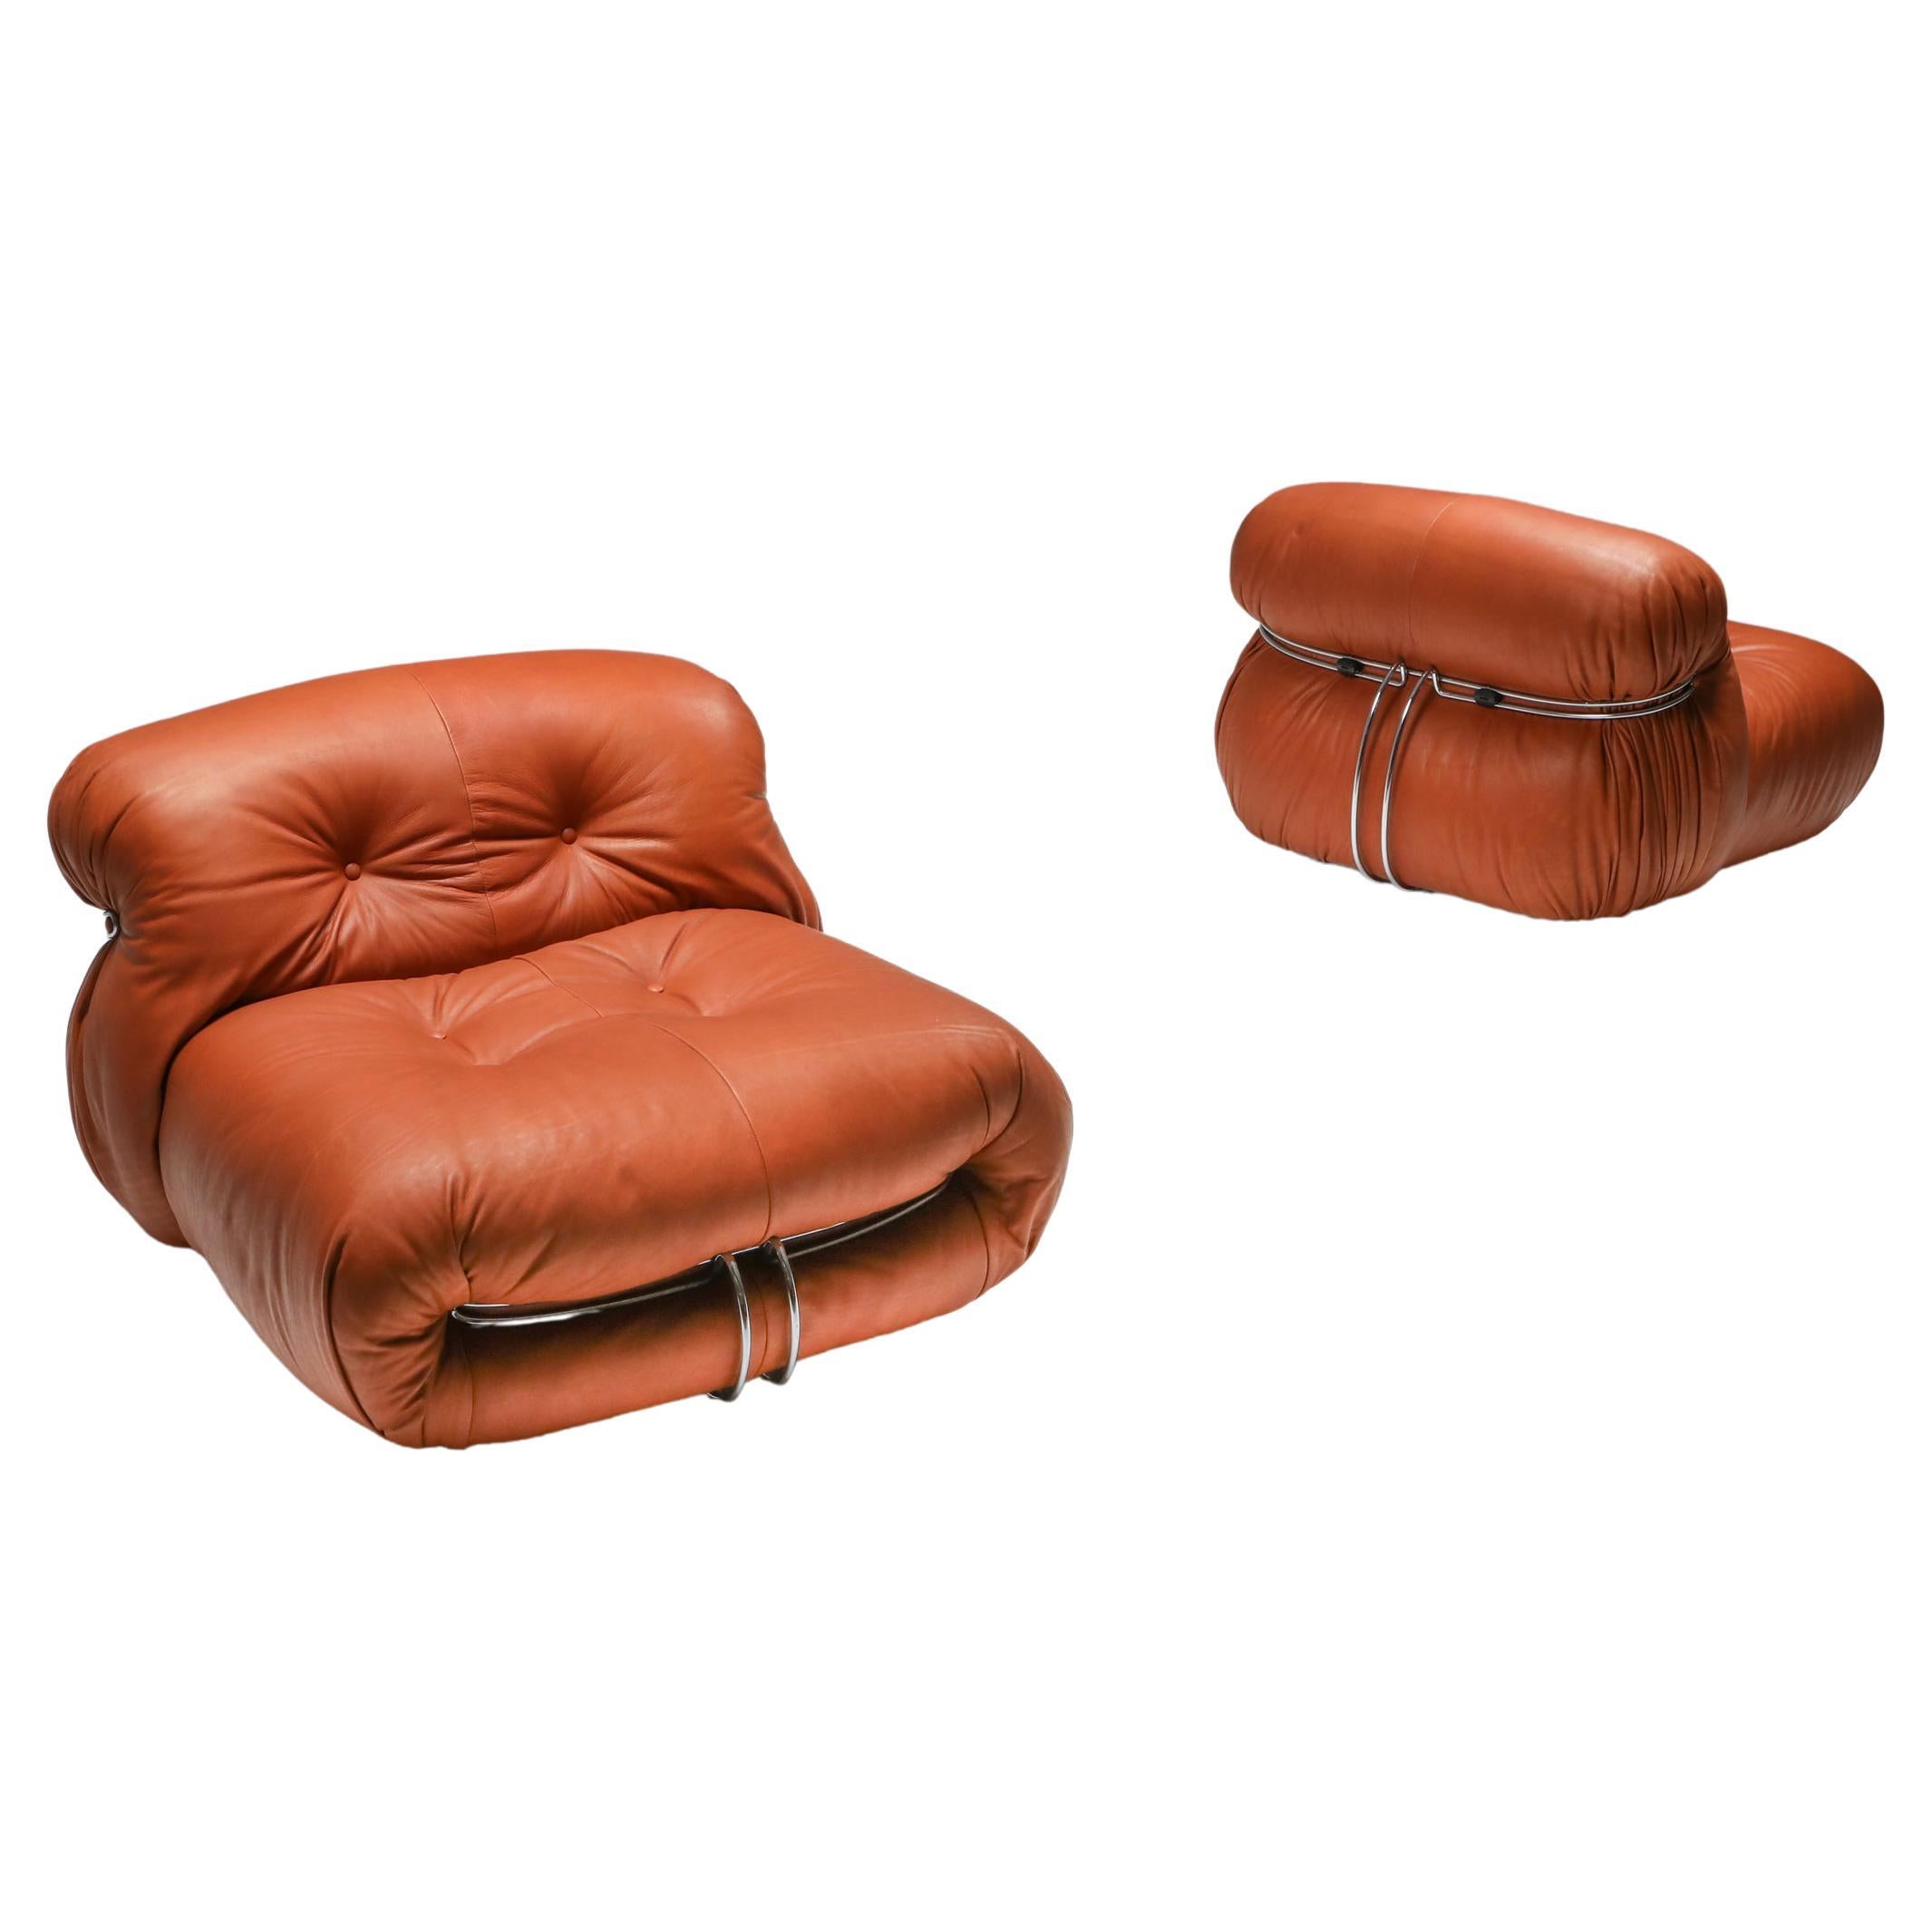 Cassina 'Soriana' Pair of Lounge Chairs by Afra and Tobia Scarpa, 1970's